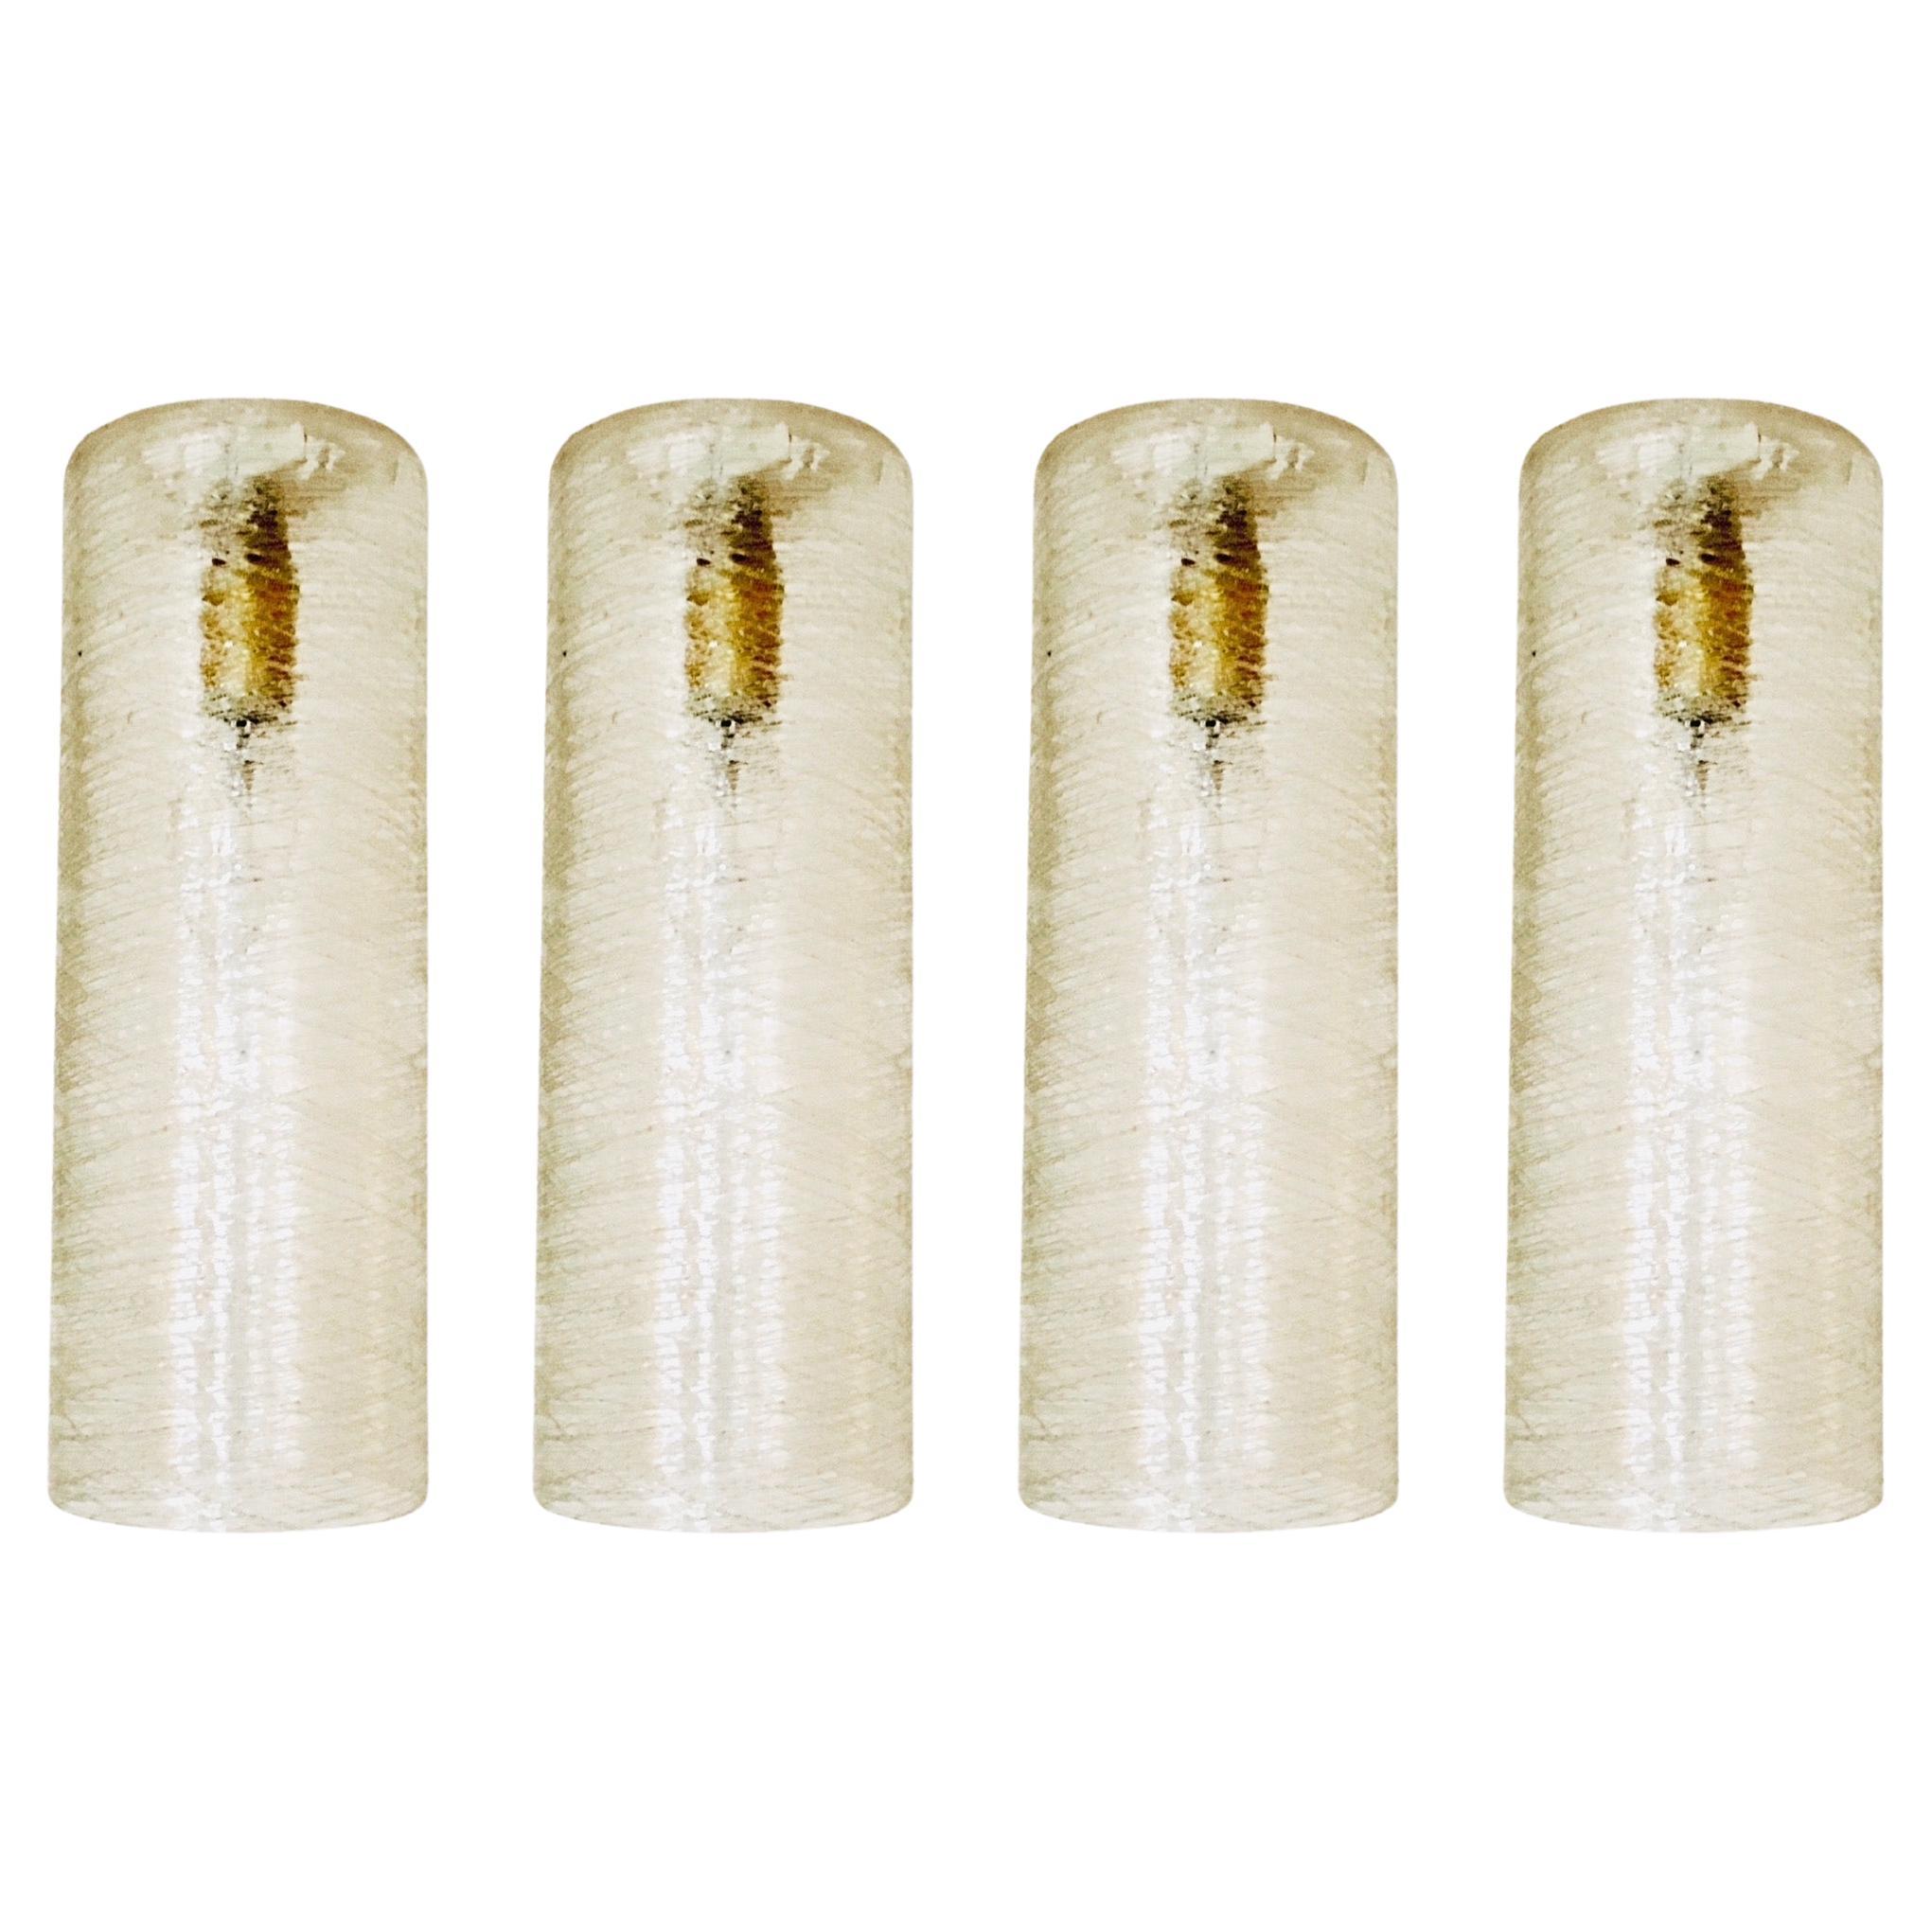 Set of 4 Glass Pendant Lamps by Doria